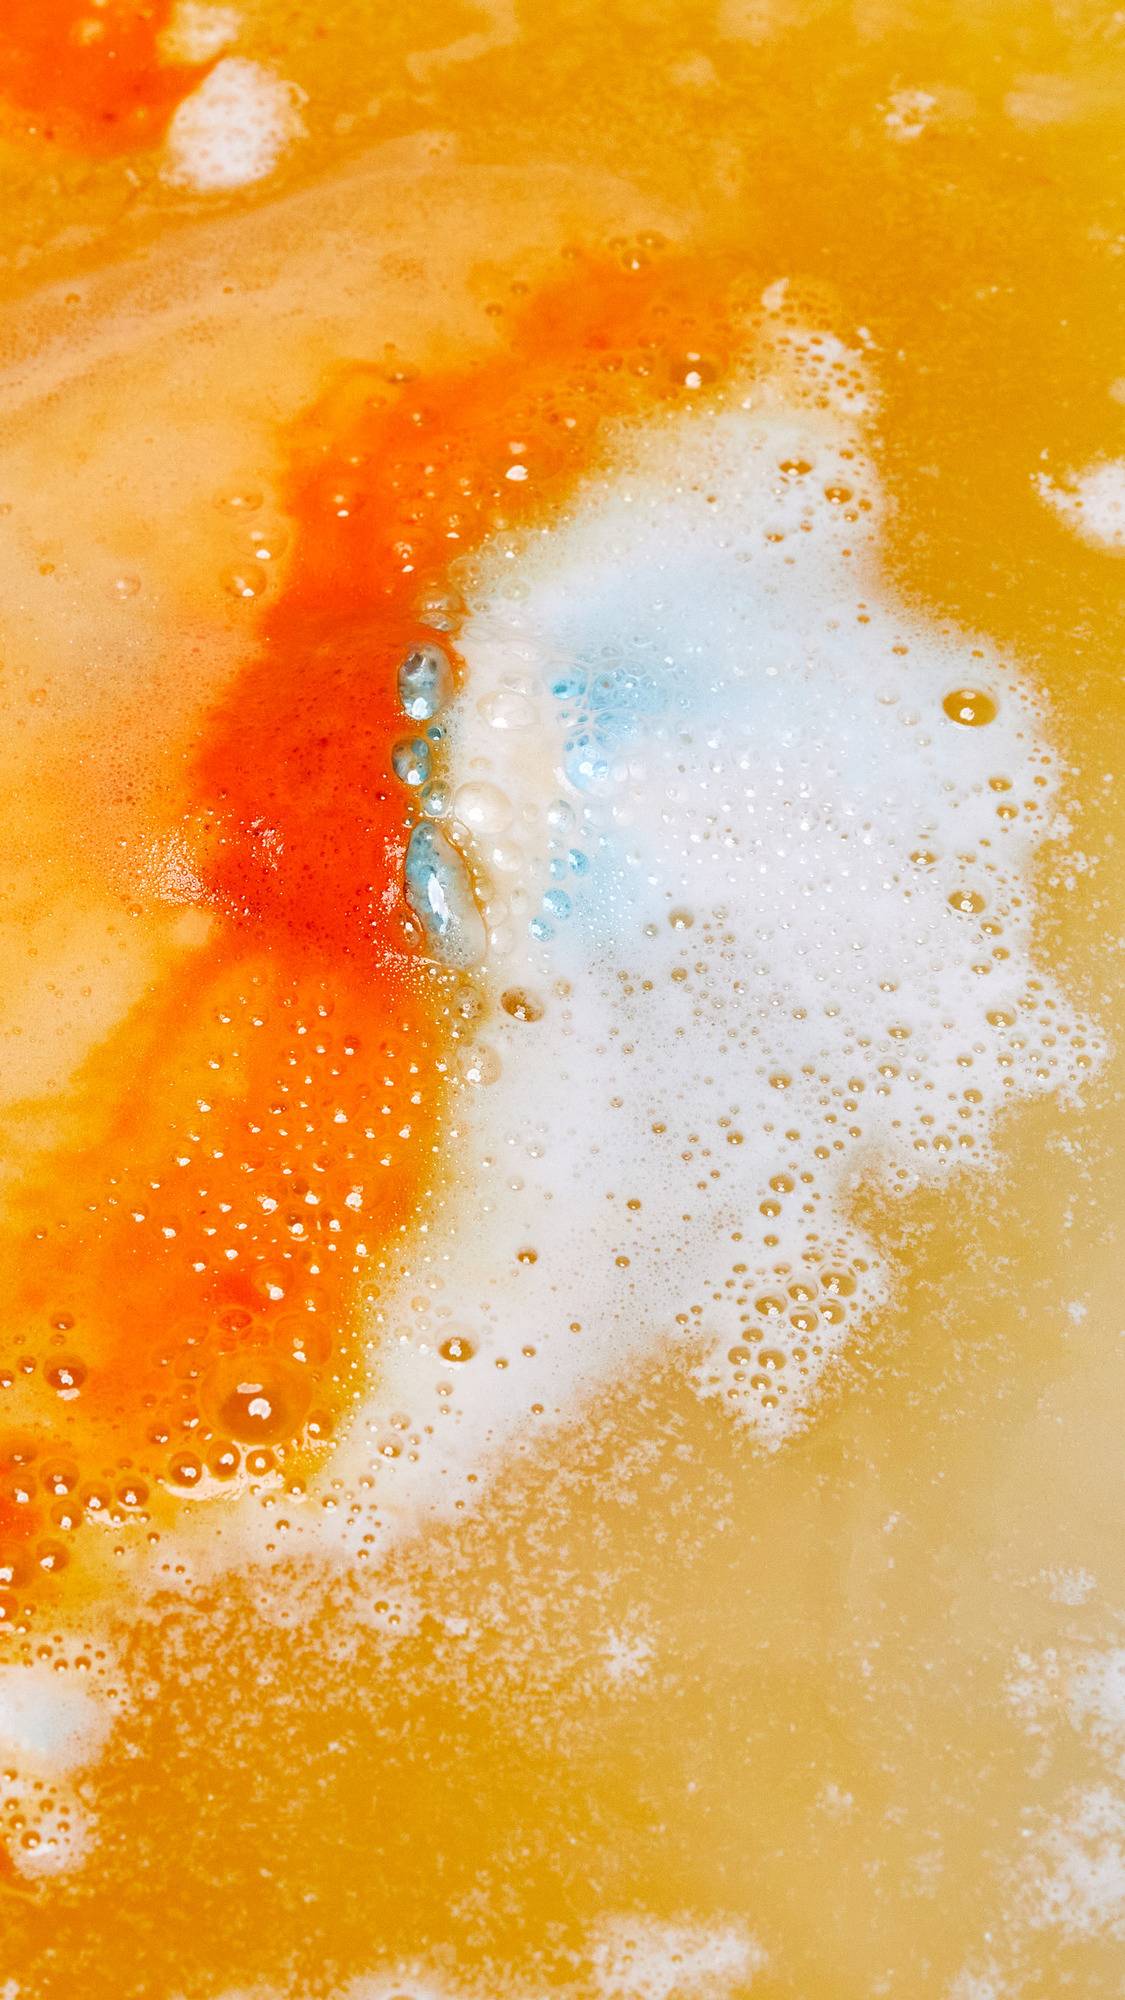 The Chelsea Morning bath bomb has just been placed into the bath water. The top half gives off vibrant, orange, foamy ripples while the bottom of the bath bomb releases delicate blue and white foamy swirls.